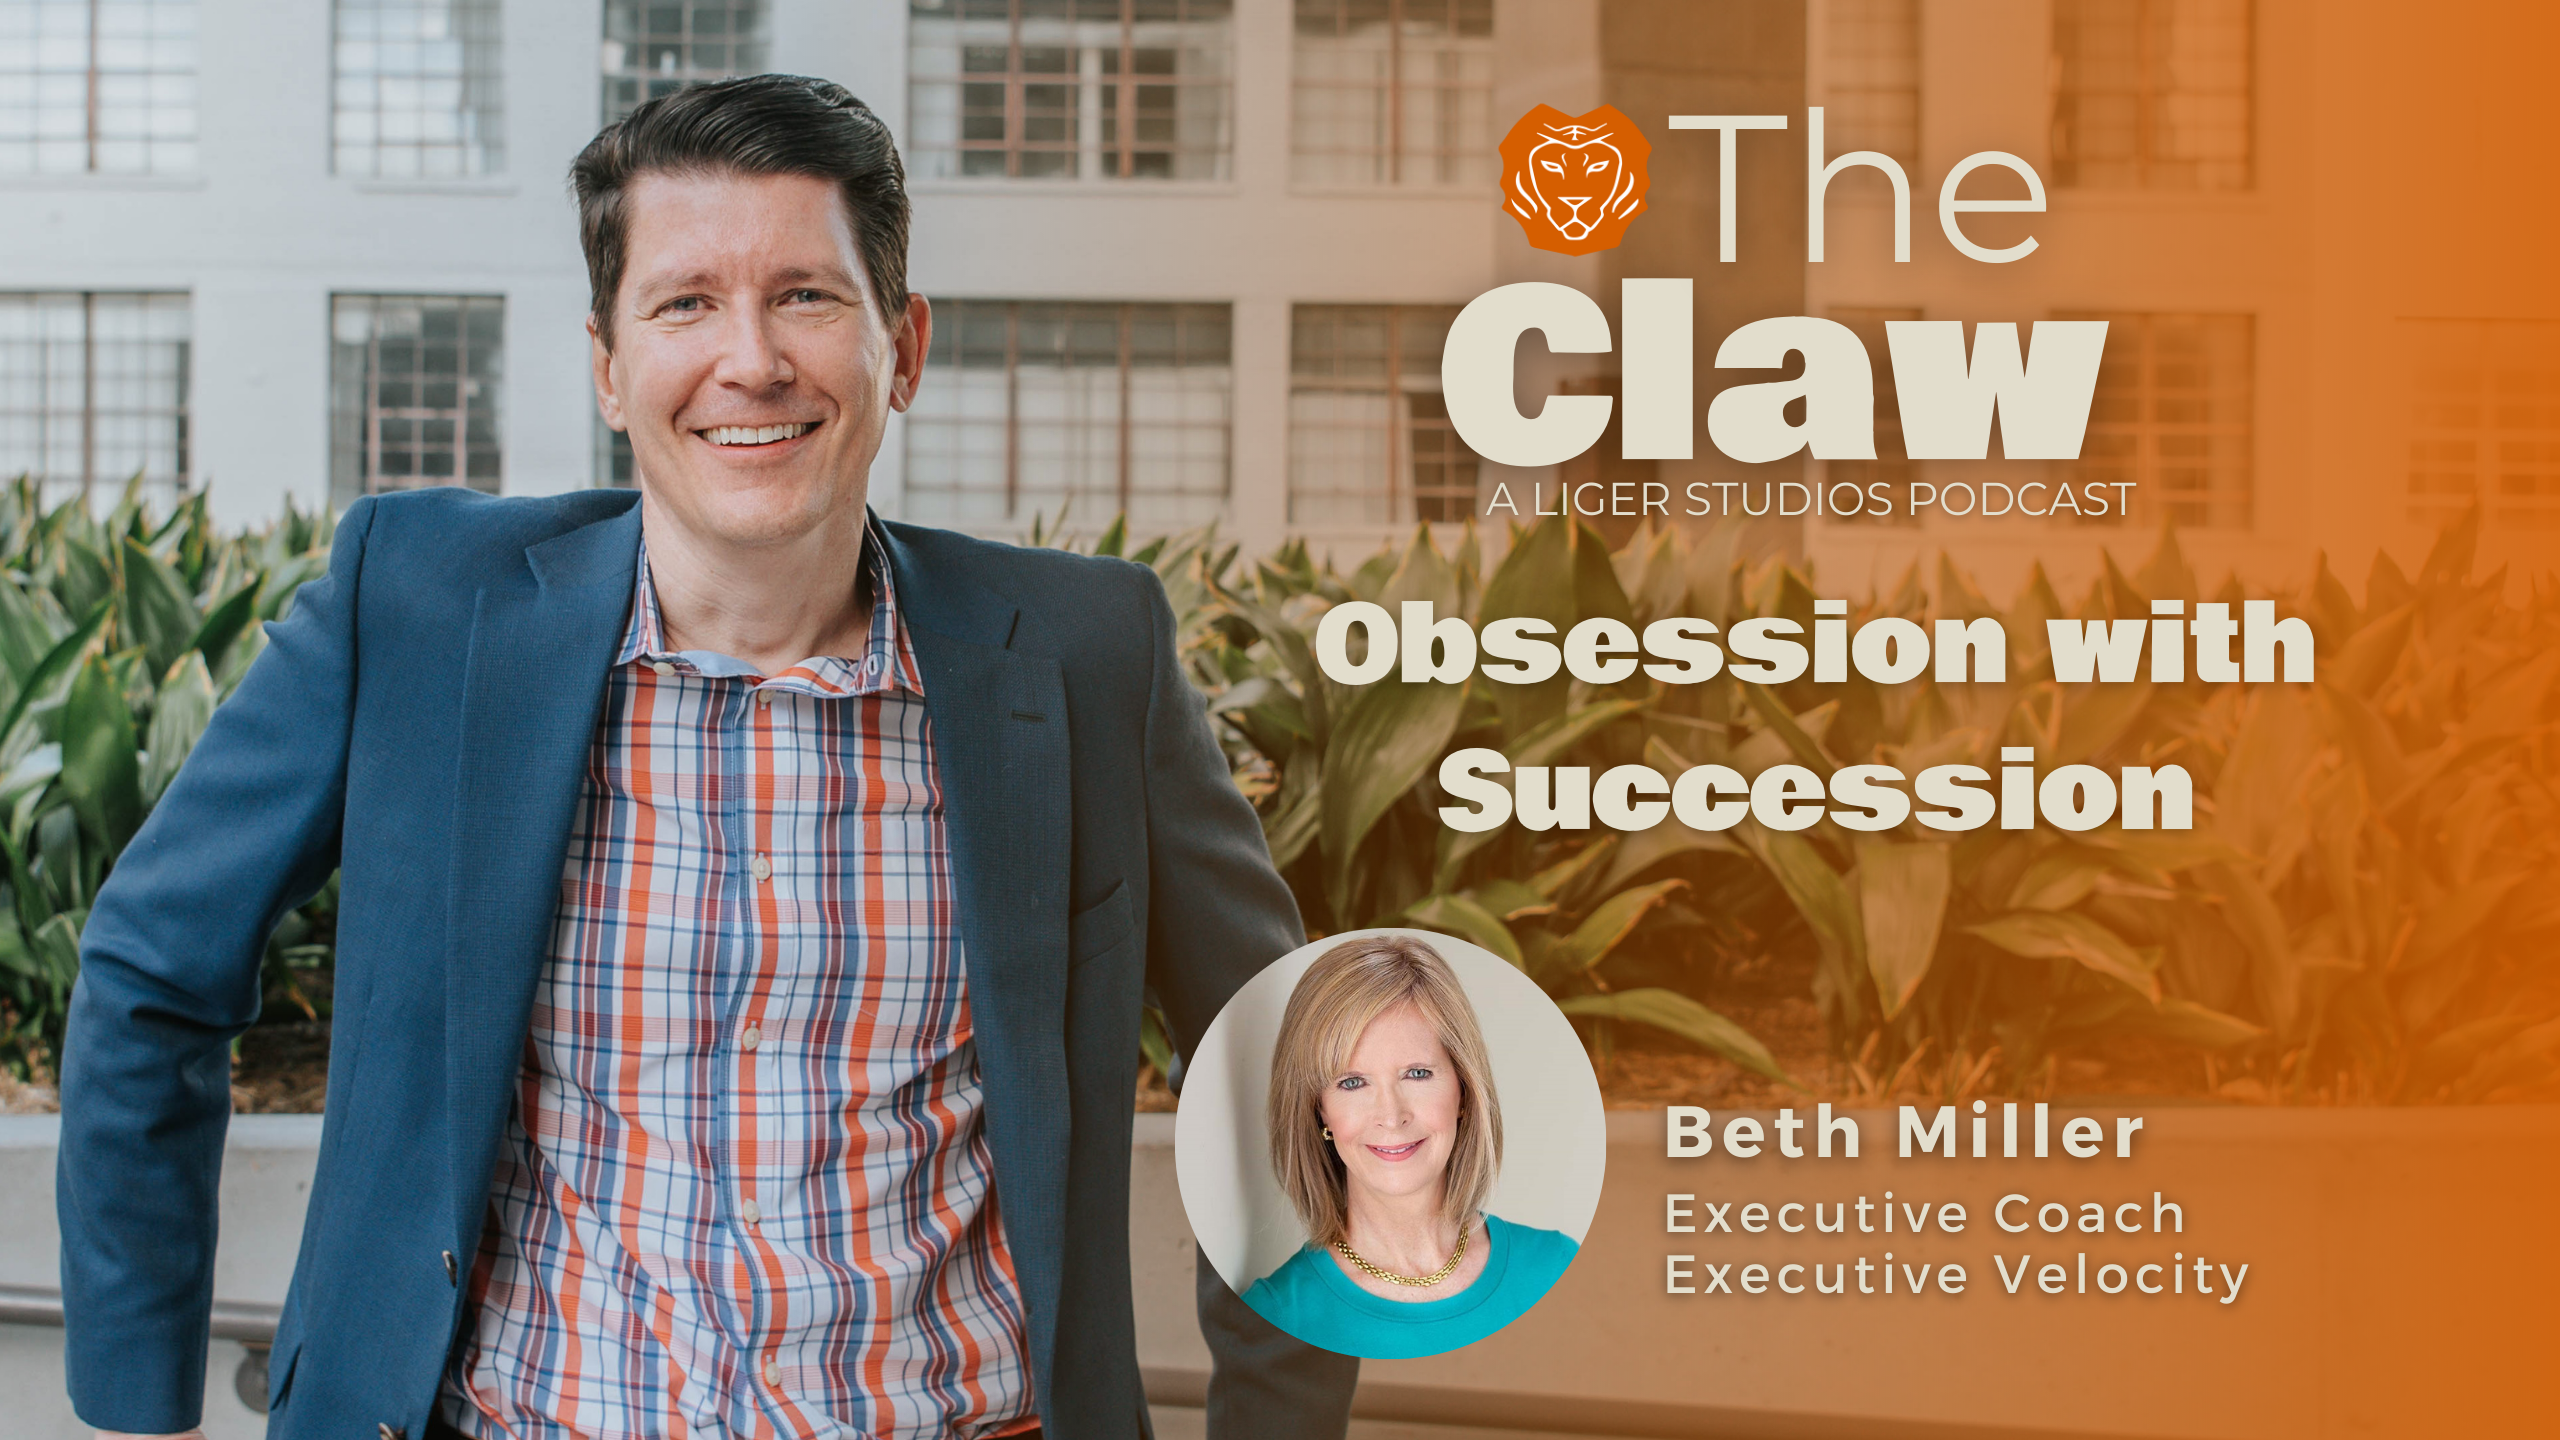 The Claw Podcast: Obsession with Succession with Beth Miller